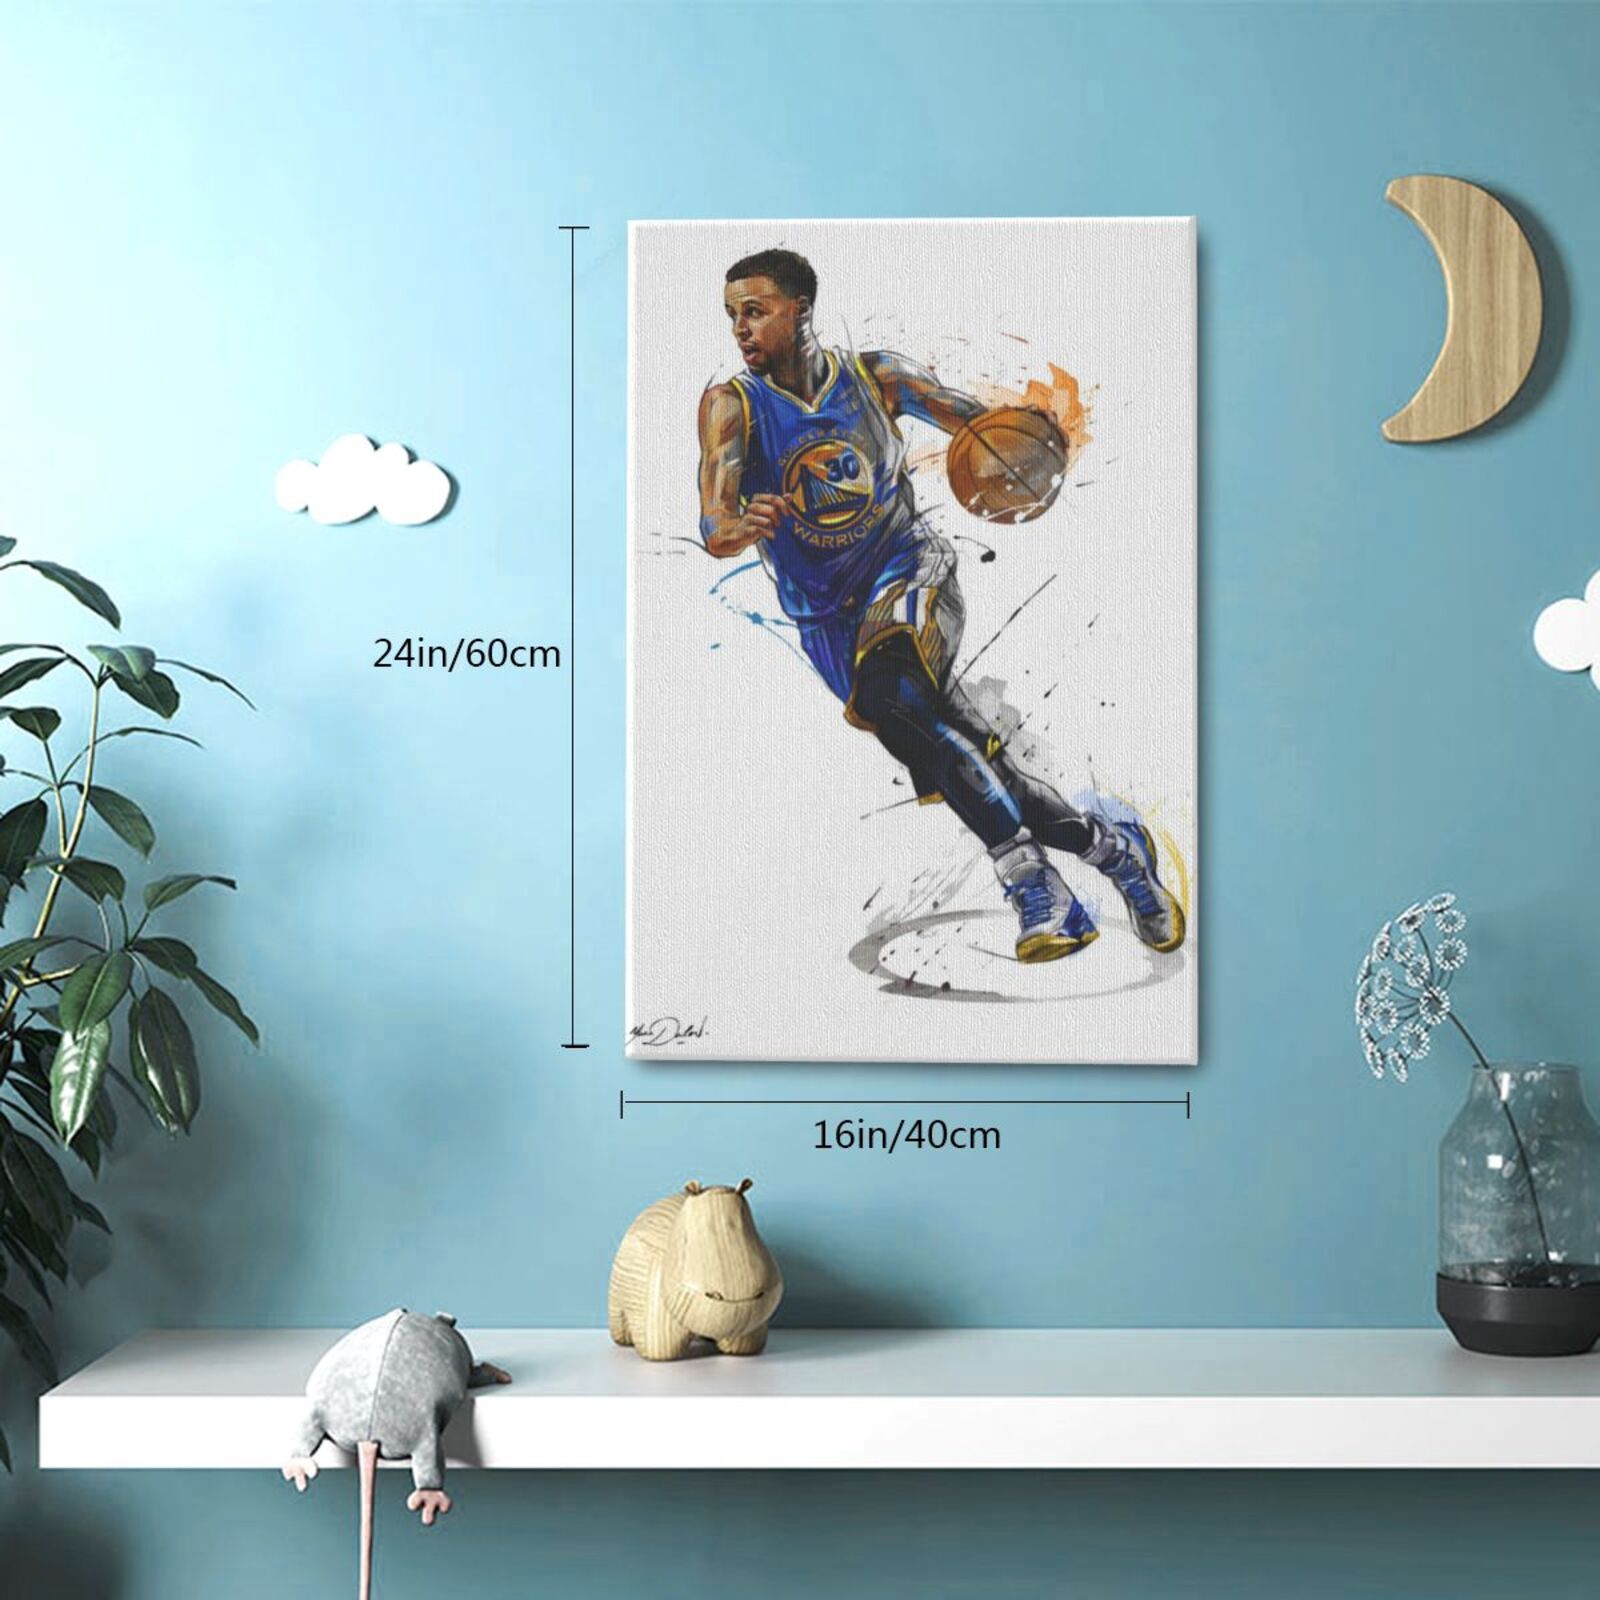 Ruiyan Stephen Curry Poster for Walls, Basketball Superstar Sports Canvas Wall Art Print, Inspirational Man Cave Boys Room Office Decor, Gifts Fans, 1